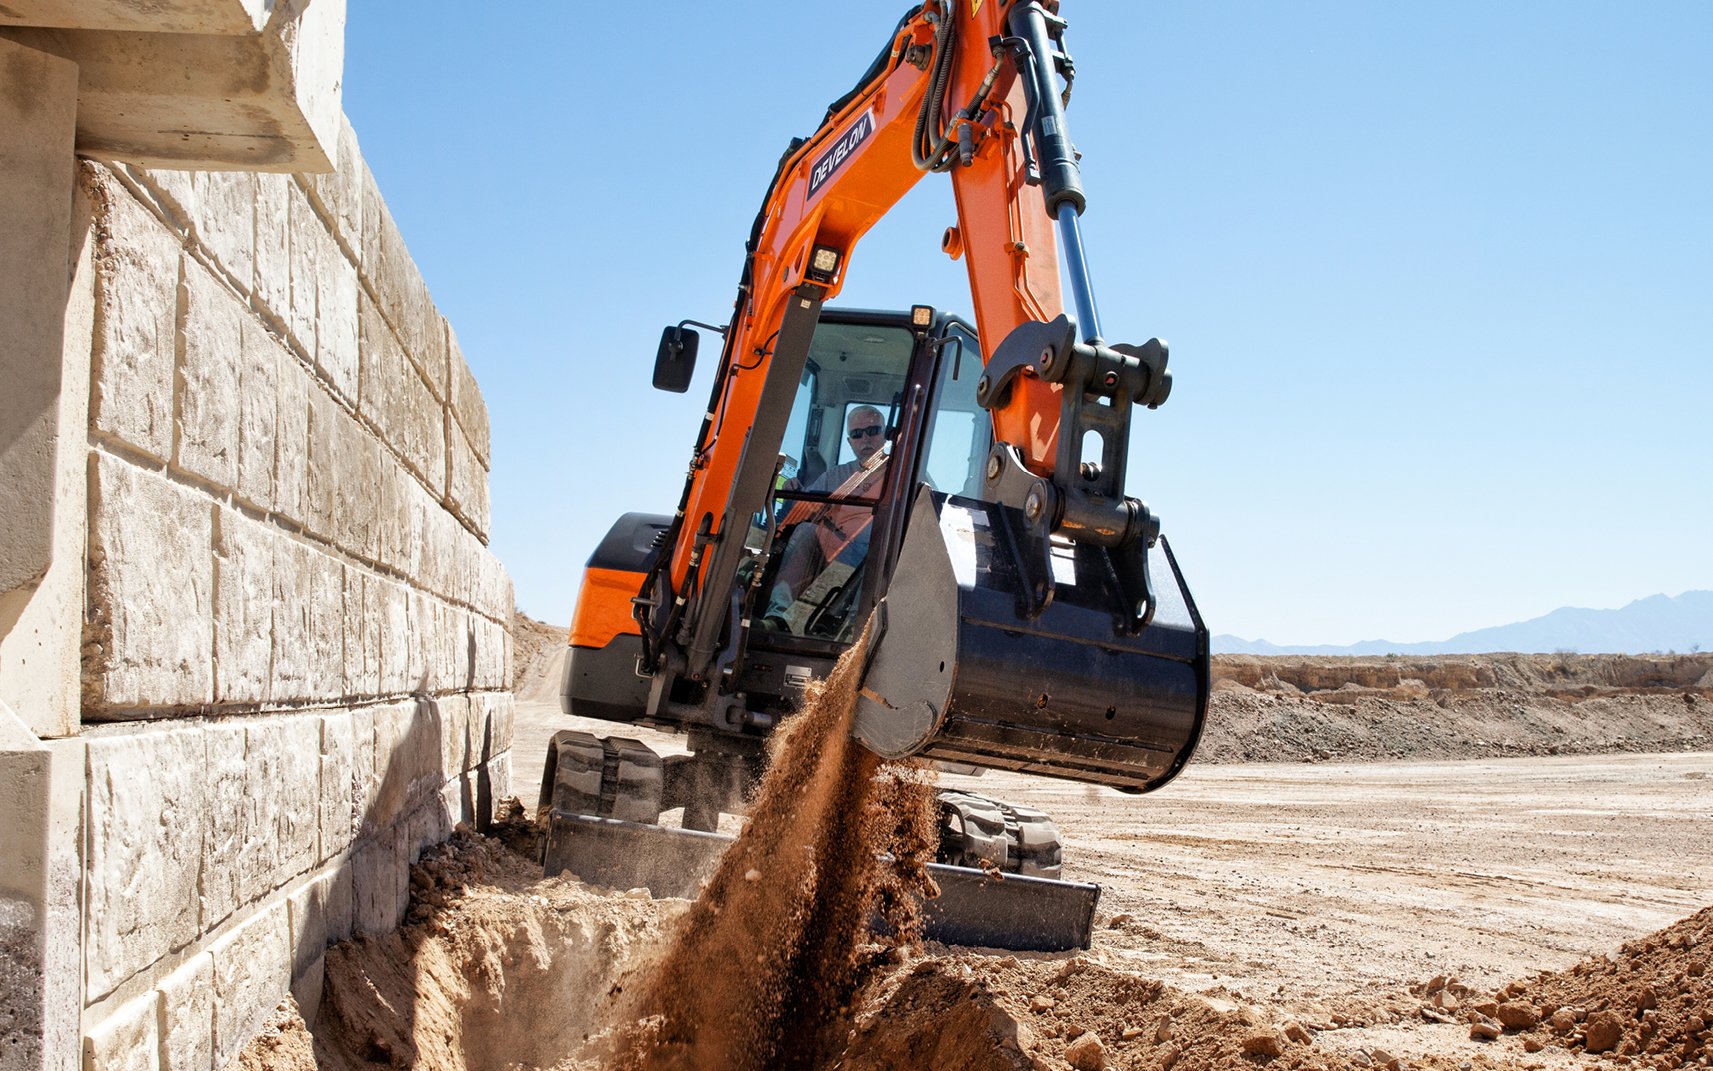 A DEVELON compact excavator digs next to a wall.